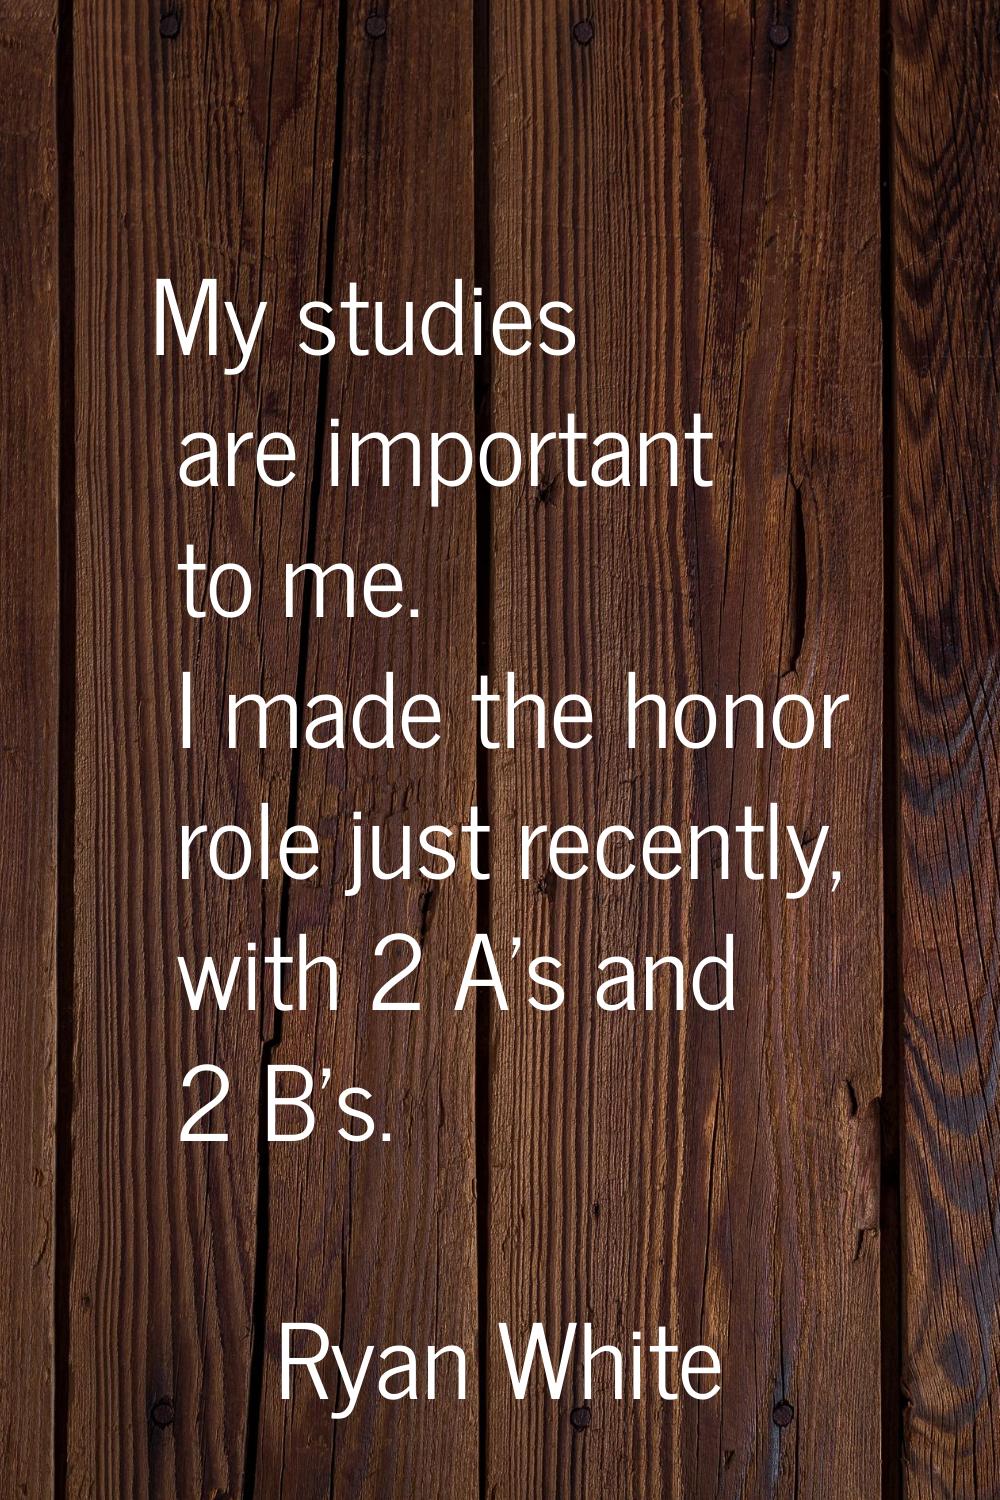 My studies are important to me. I made the honor role just recently, with 2 A's and 2 B's.